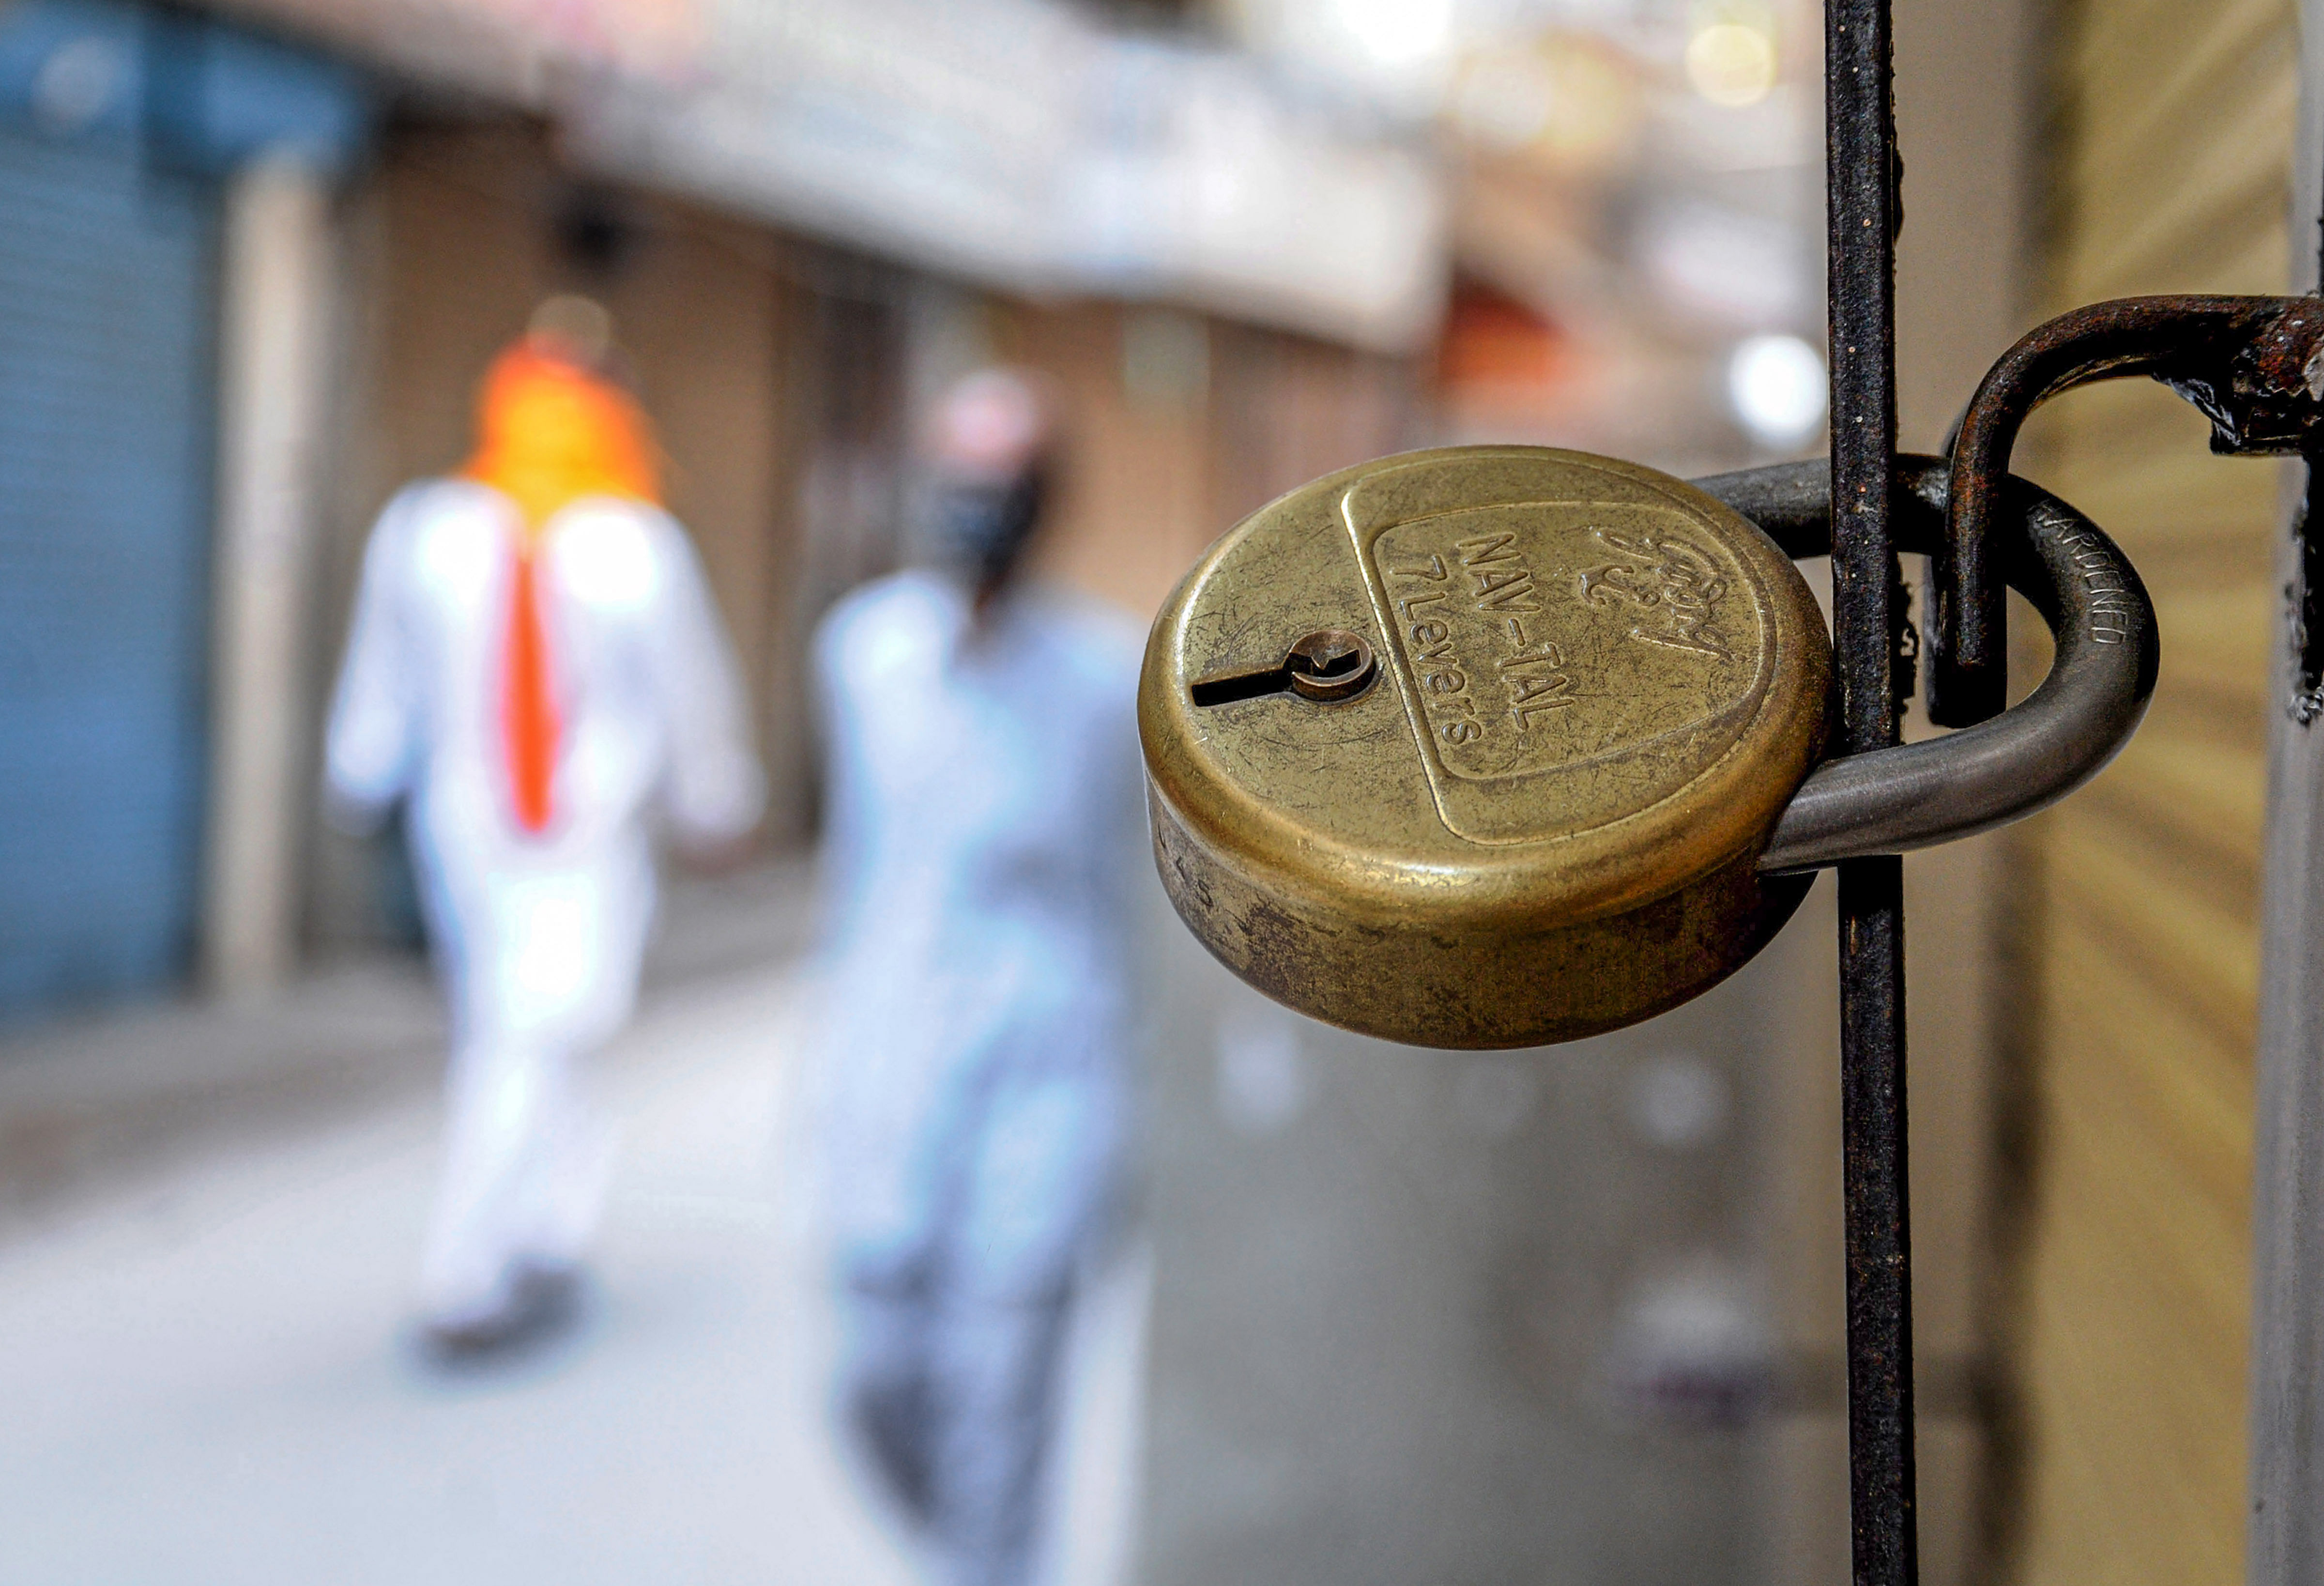 Closed shops at a market in Amritsar, Monday, mARCH 23, 2020. Punjab Chief Minister Captain Amarinder Singh on Sunday ordered statewide lockdown. (PTI Photo)